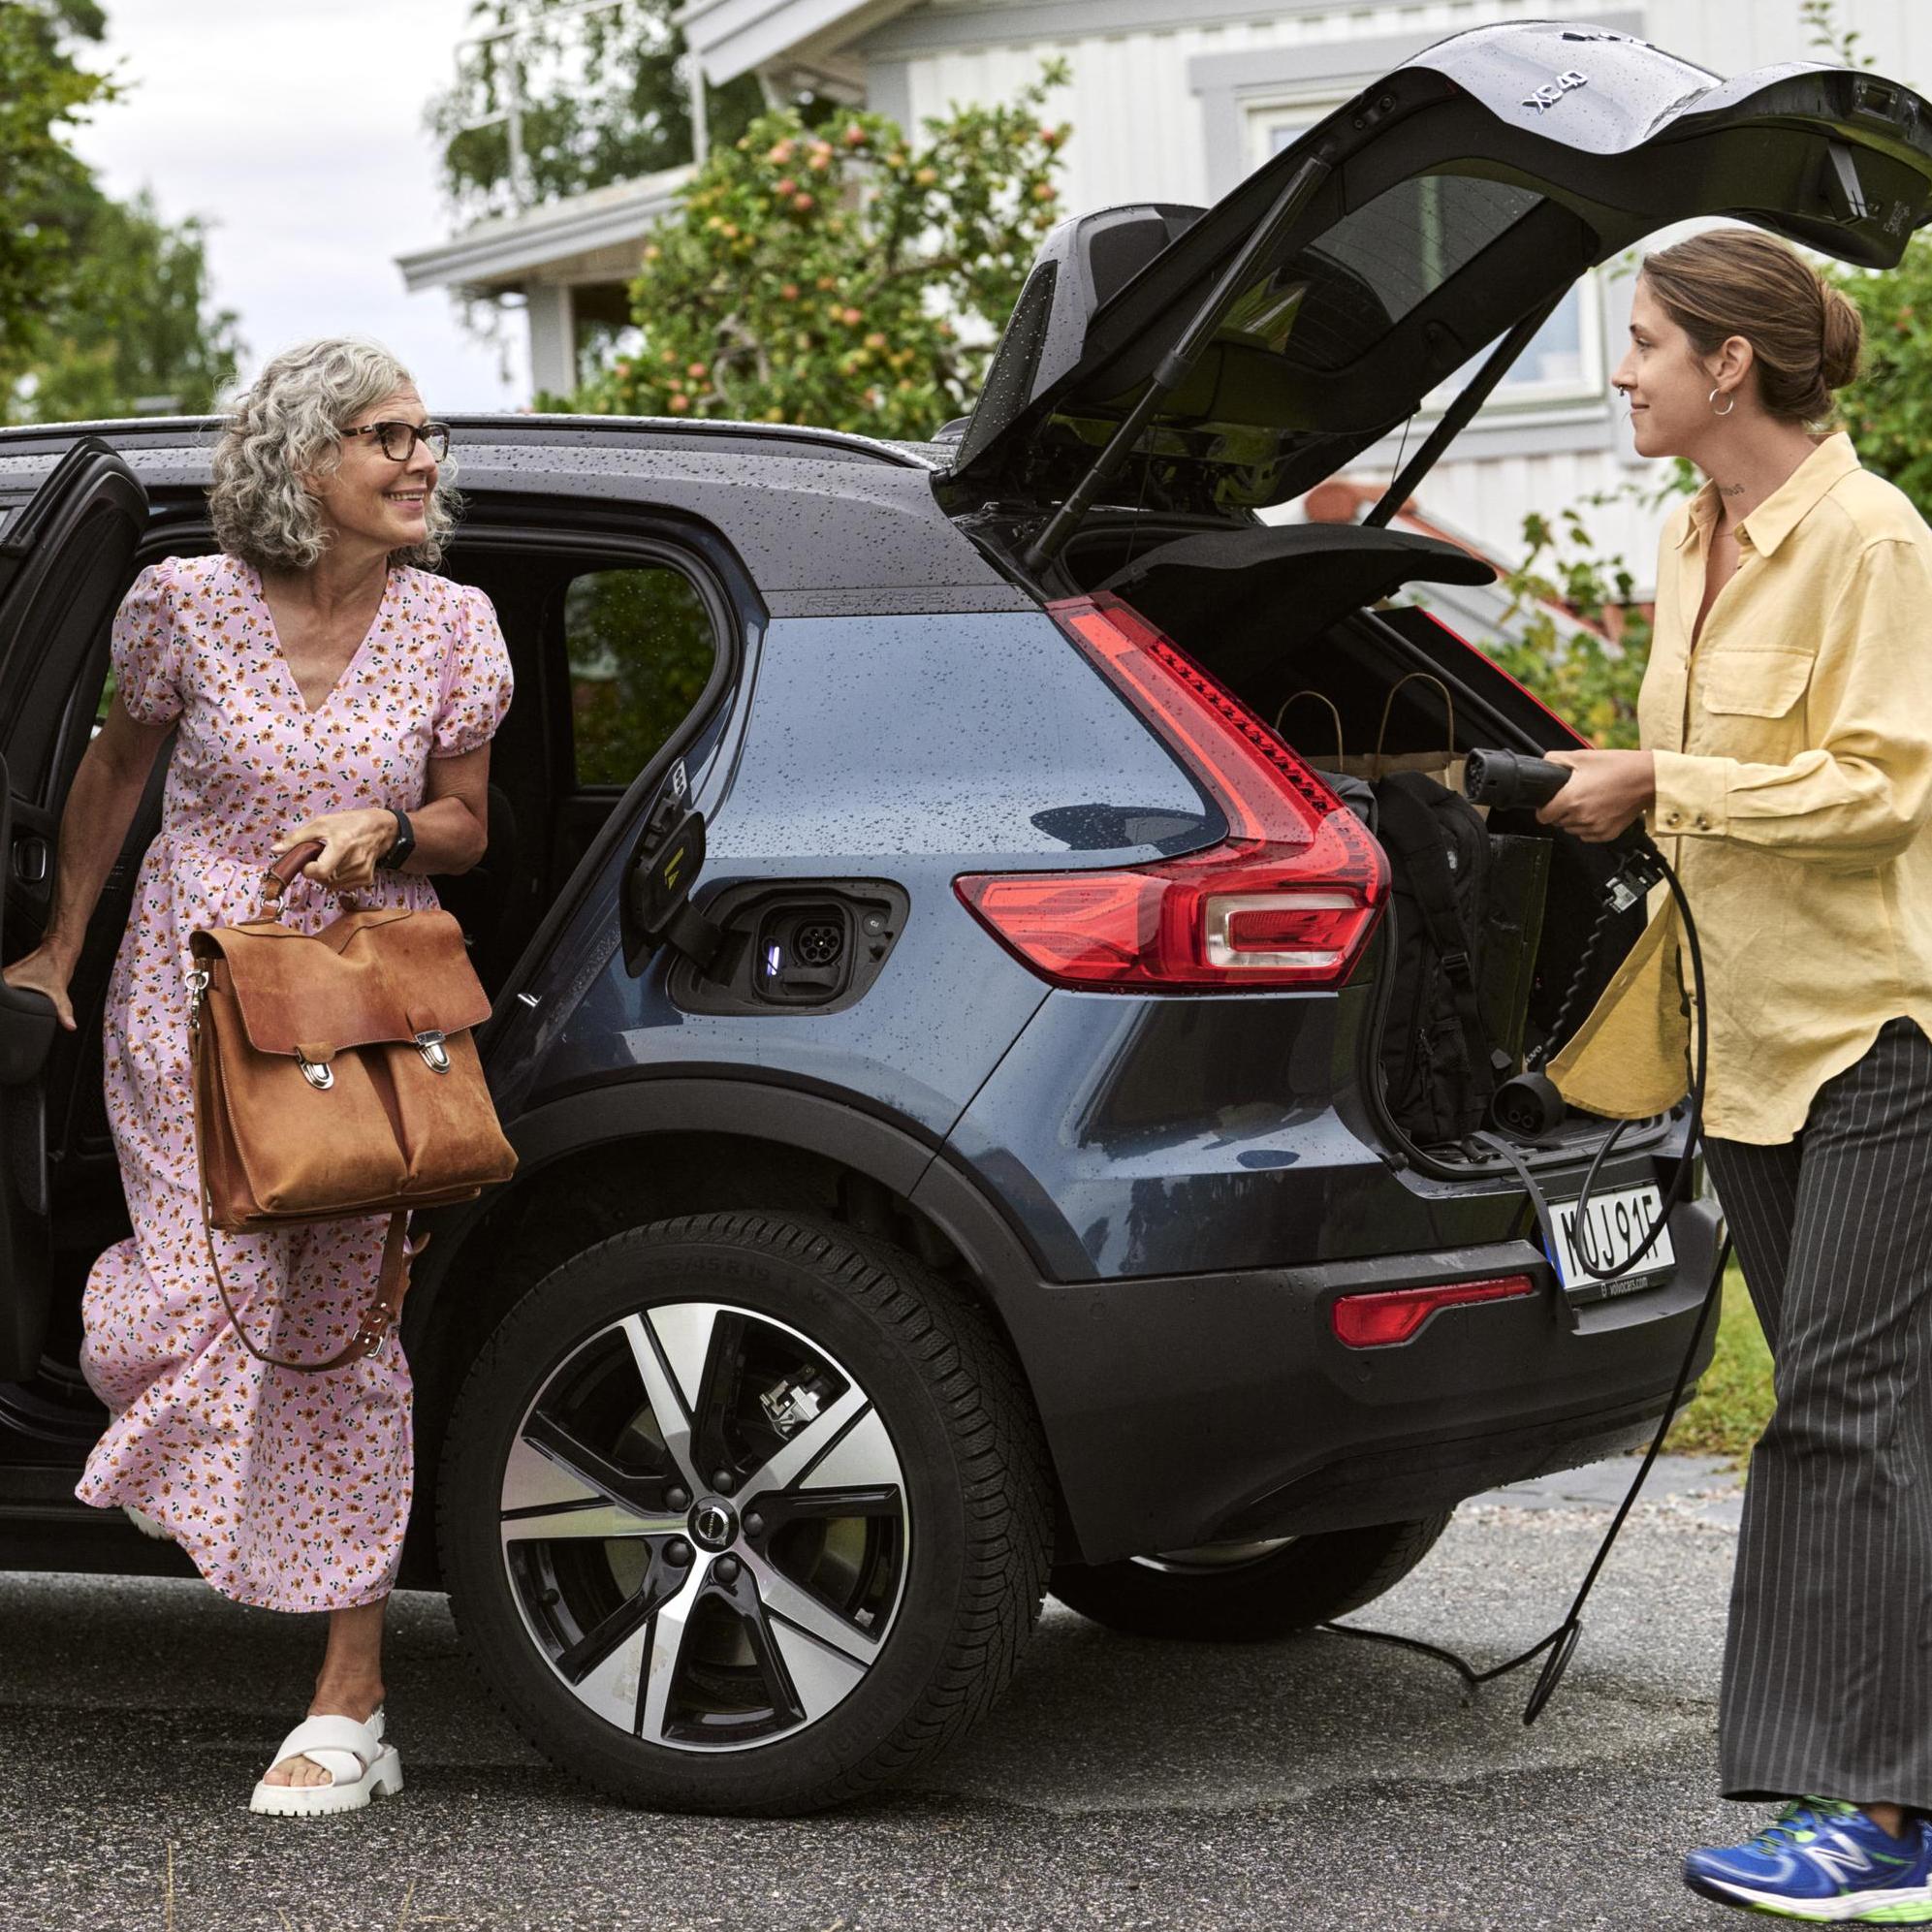 Two women talking to each other while charging the electrical car